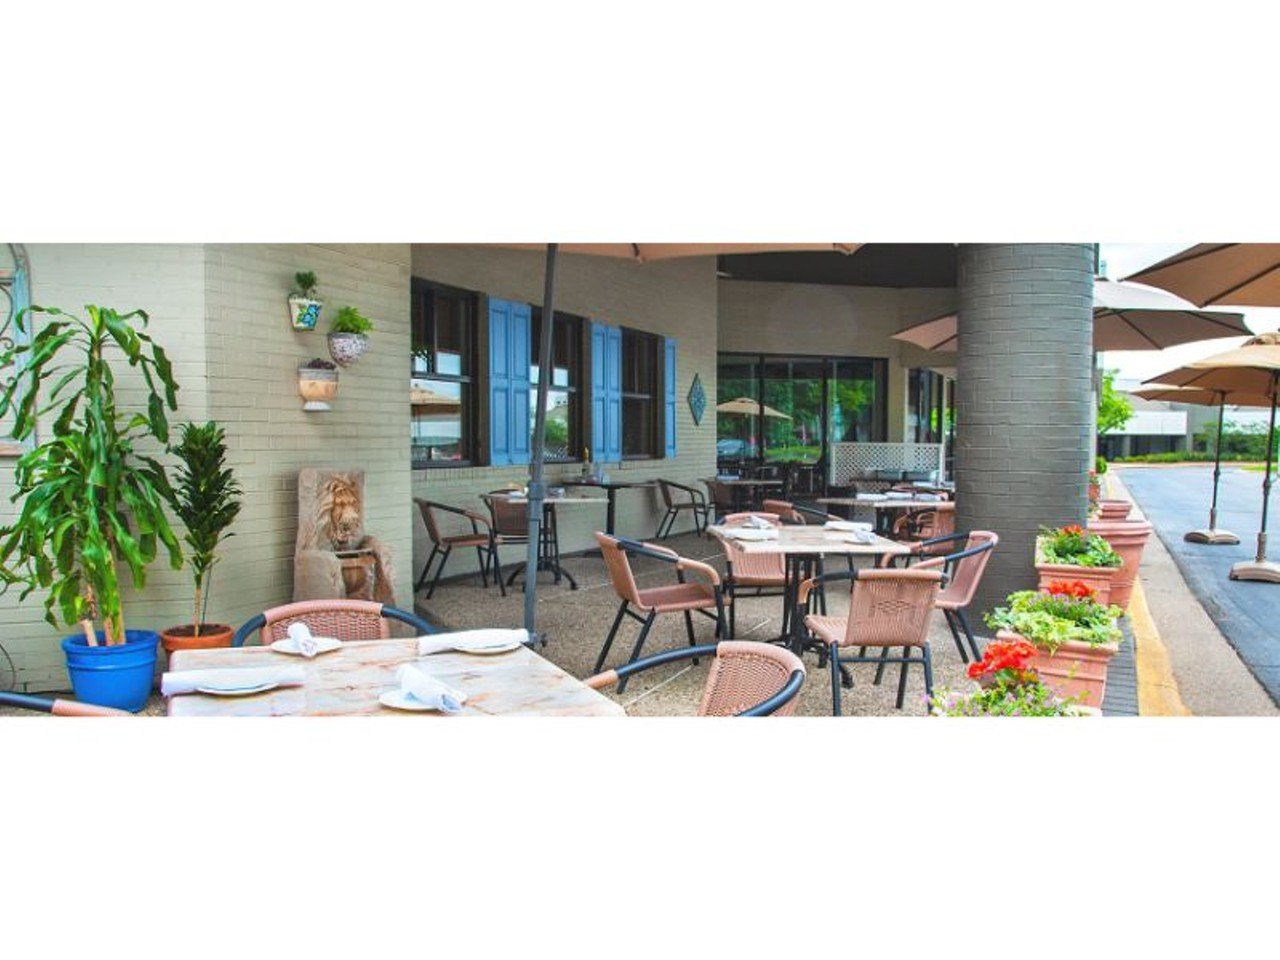 Brasserie Provence
150 N. Hurstbourne Pkwy. 
A lovely east-end patio that&#146;s dog-friendly. Photo via  Brasserie Provence